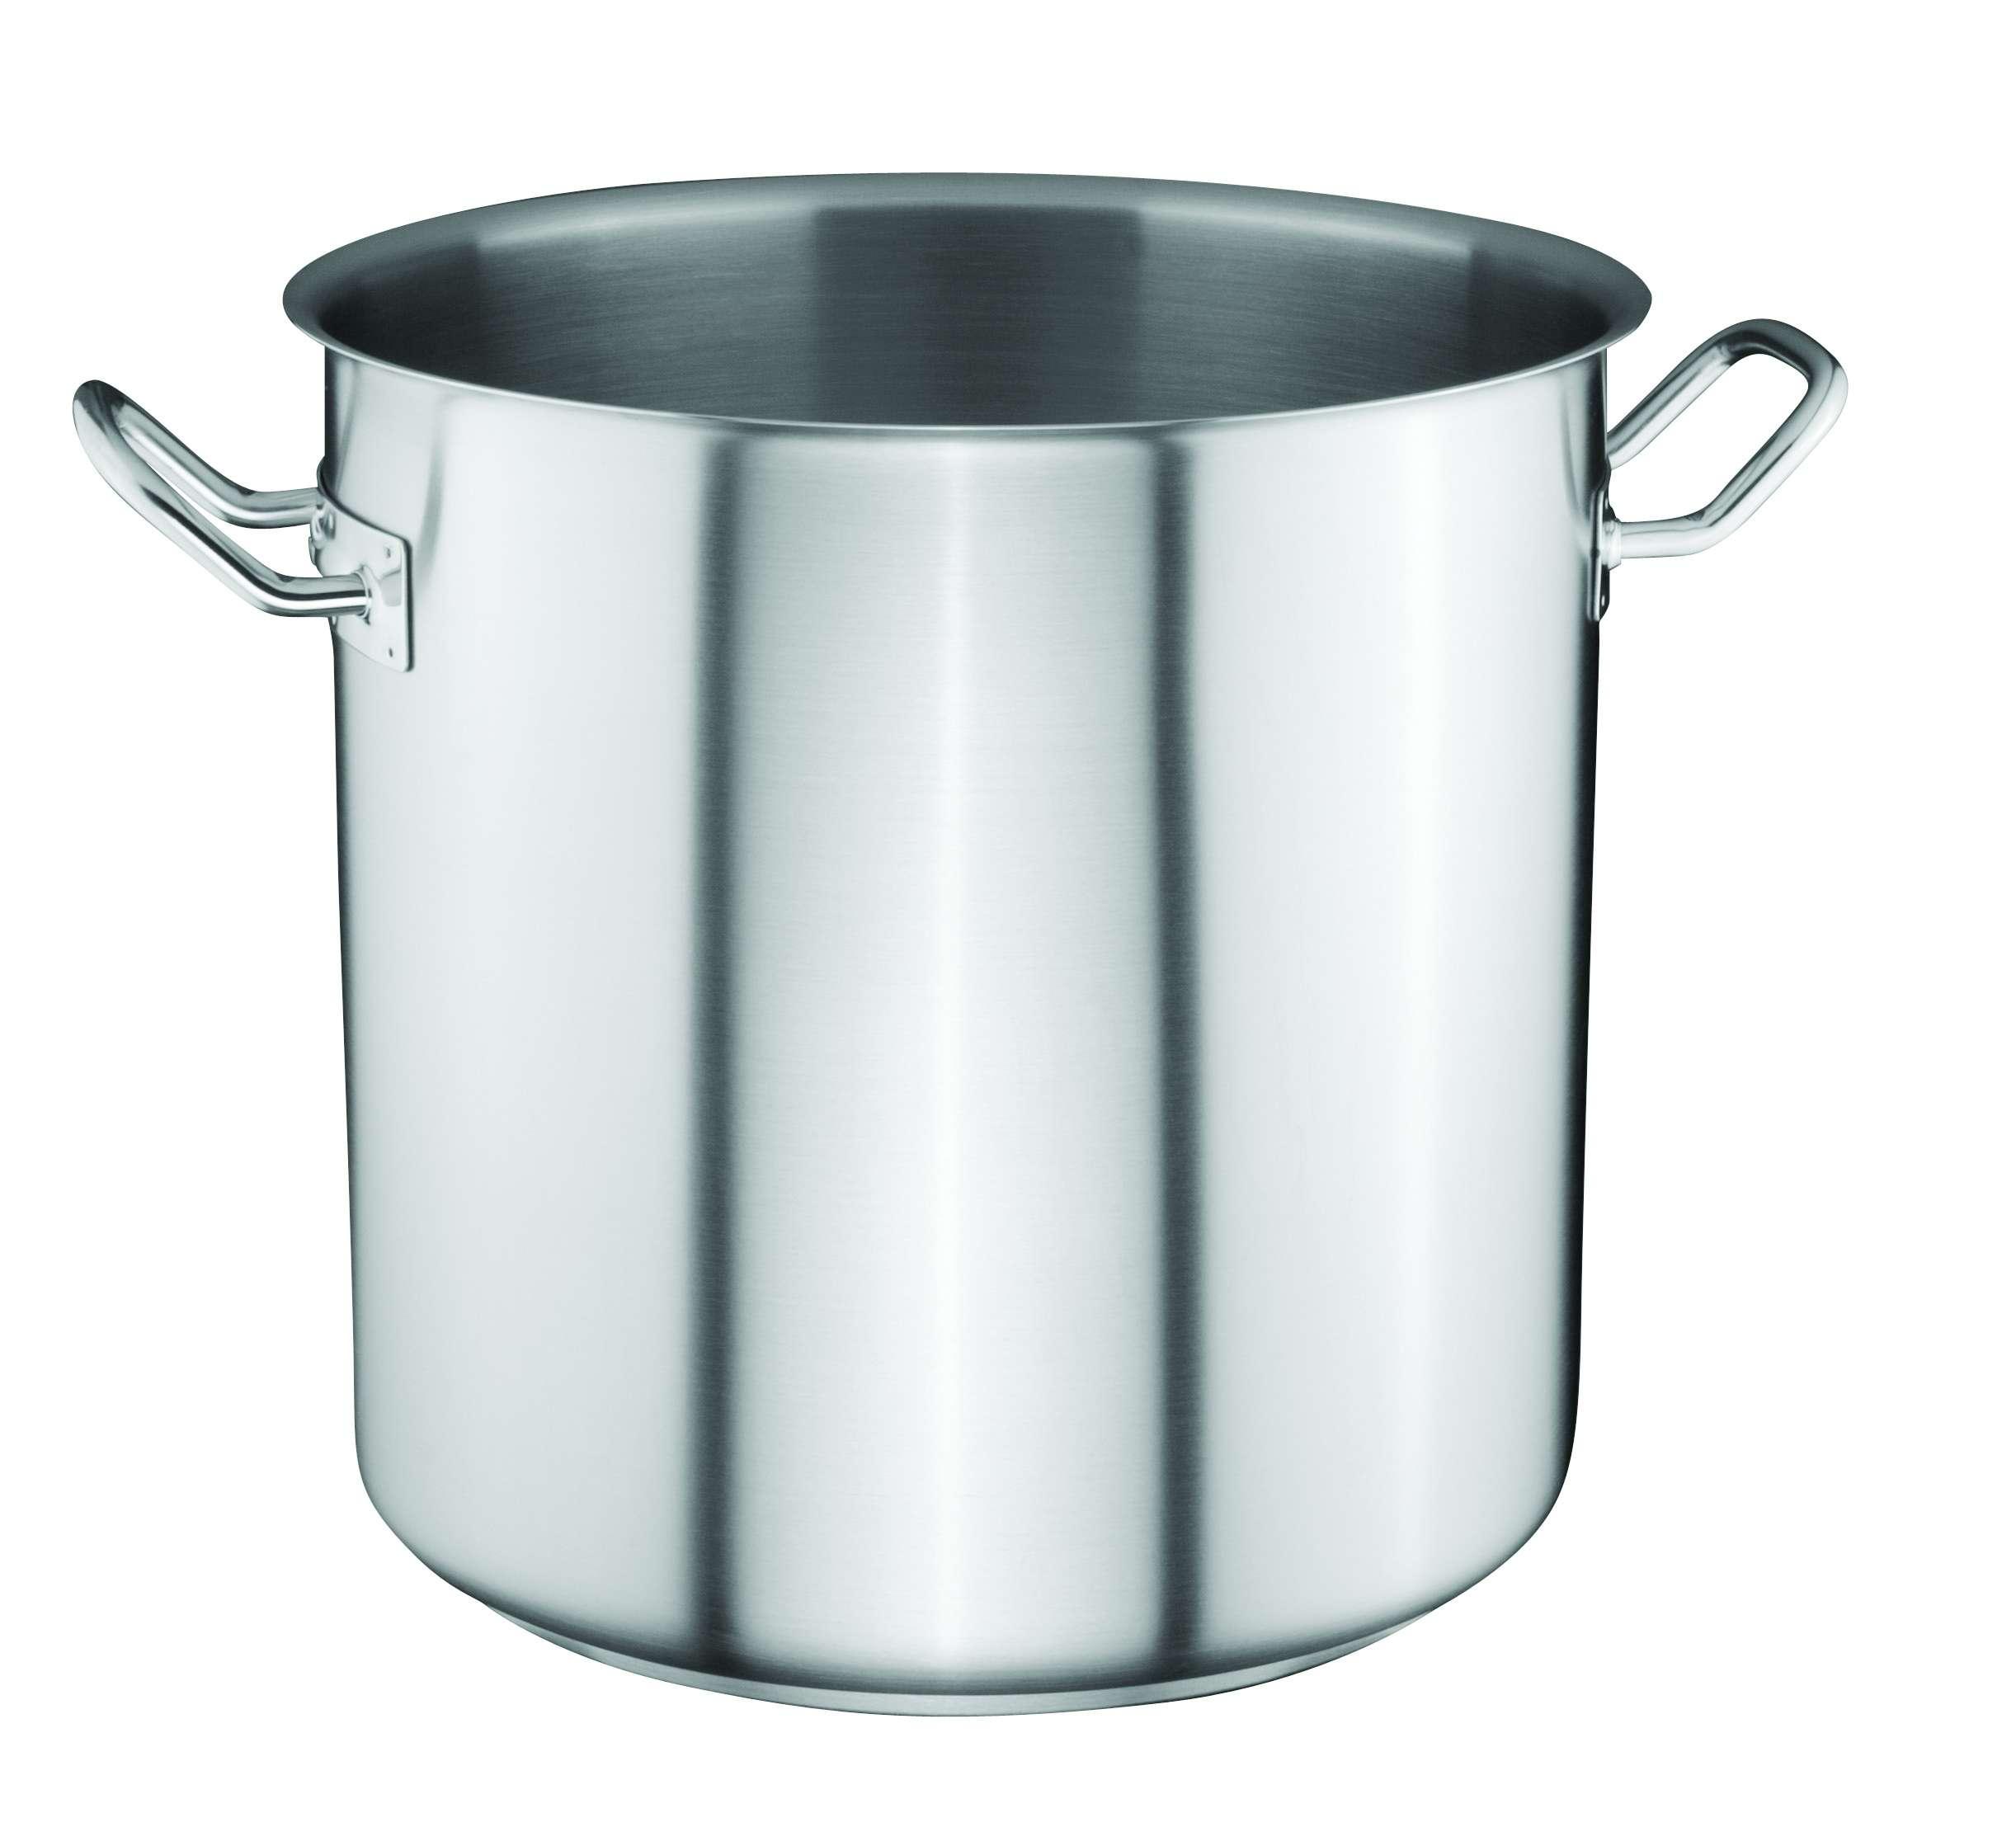 Ozti Stainless Steel Stock Pot 20 cm x 19 cm Silver Stainless Steel